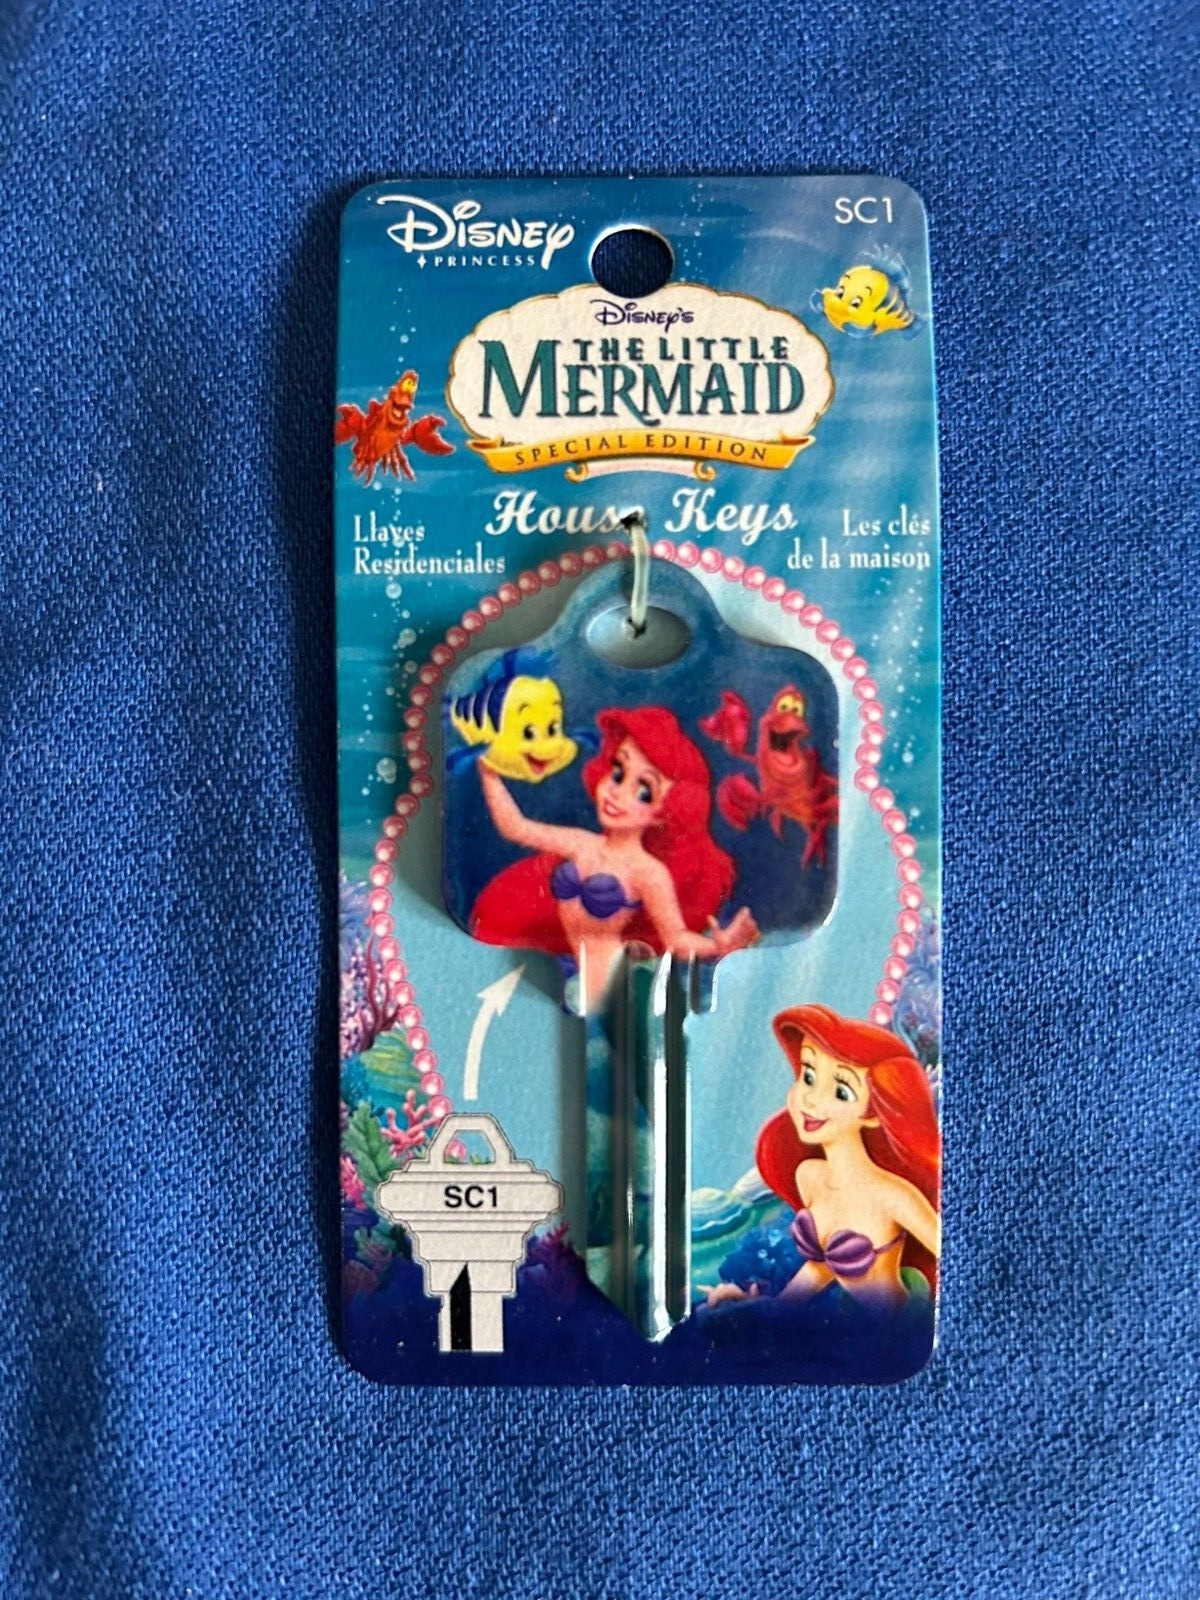 Vintage Disney\'s LITTLE MERMAID SPECIAL EDITION House KEY BLANK New and Carded